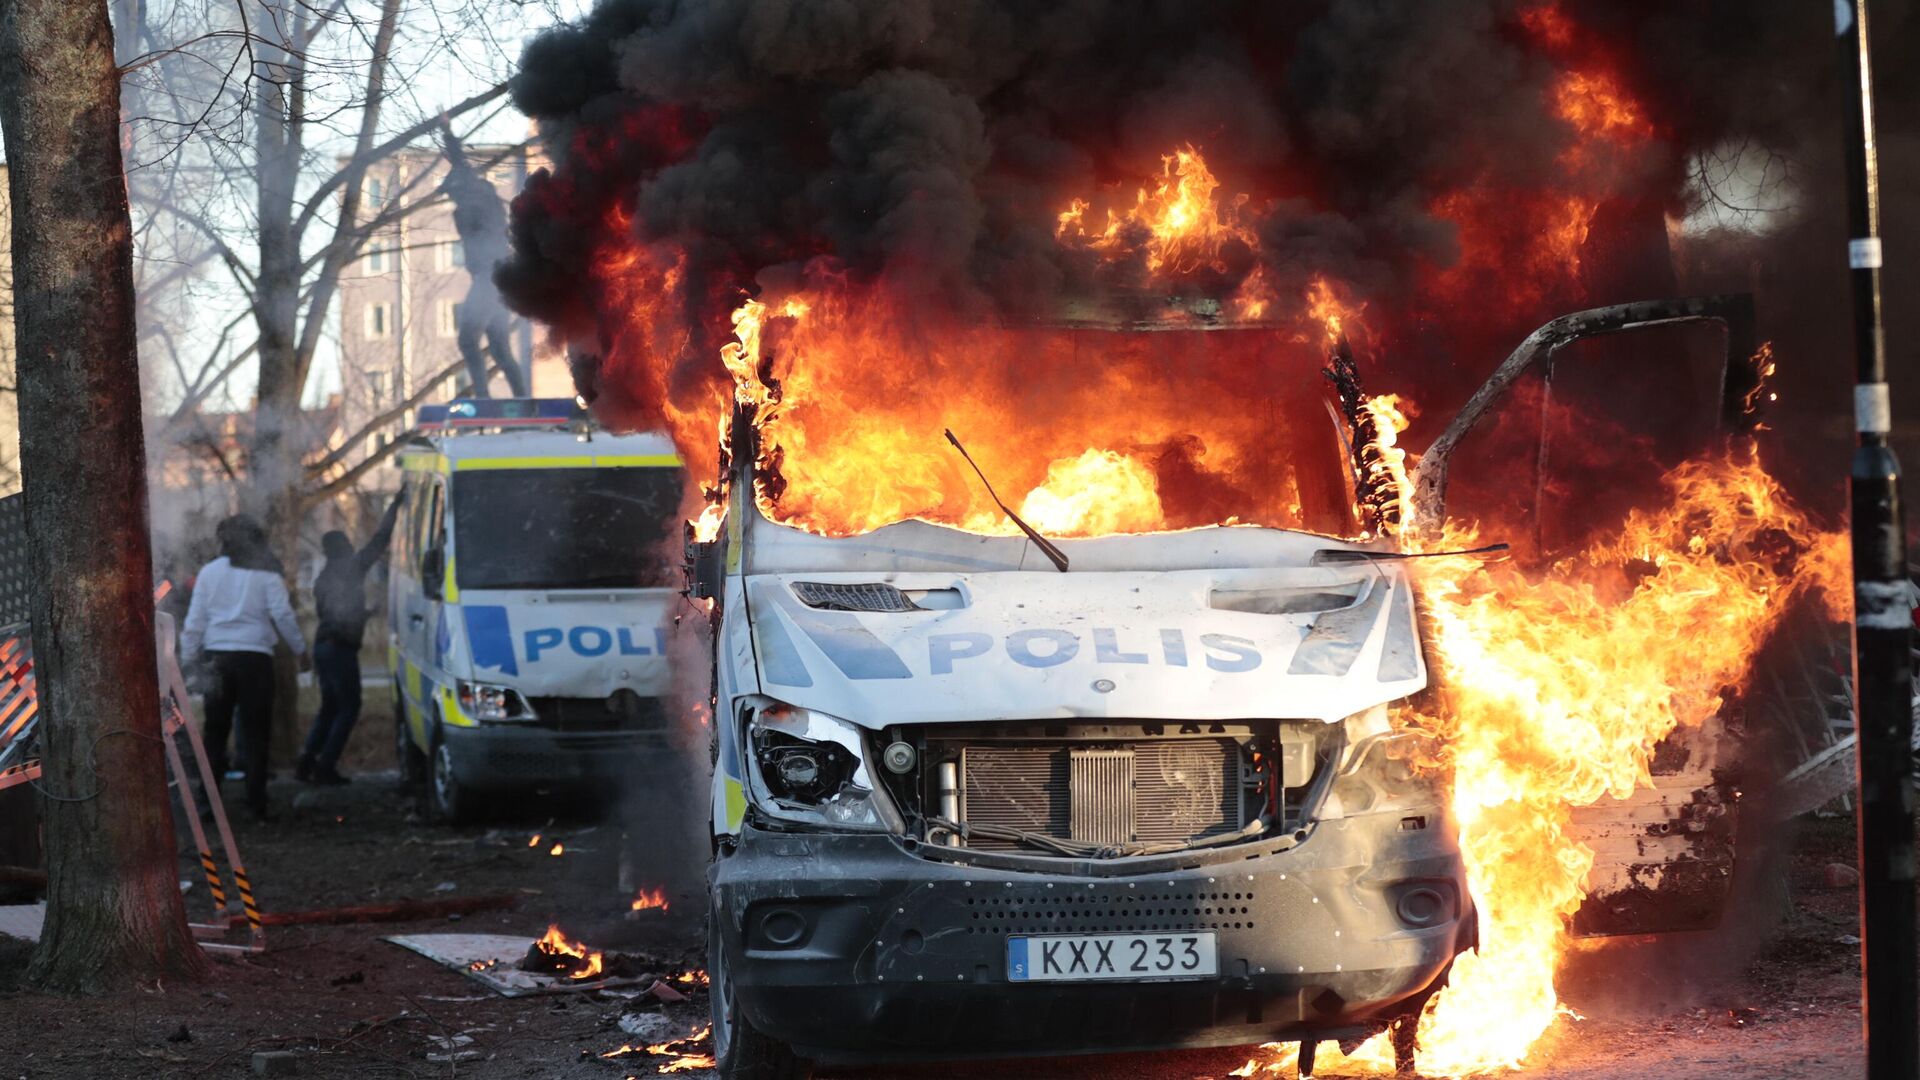 Police vans are on fire during a counter-protest in the park Sveaparken in Orebro, south-centre Sweden - Sputnik International, 1920, 07.05.2022